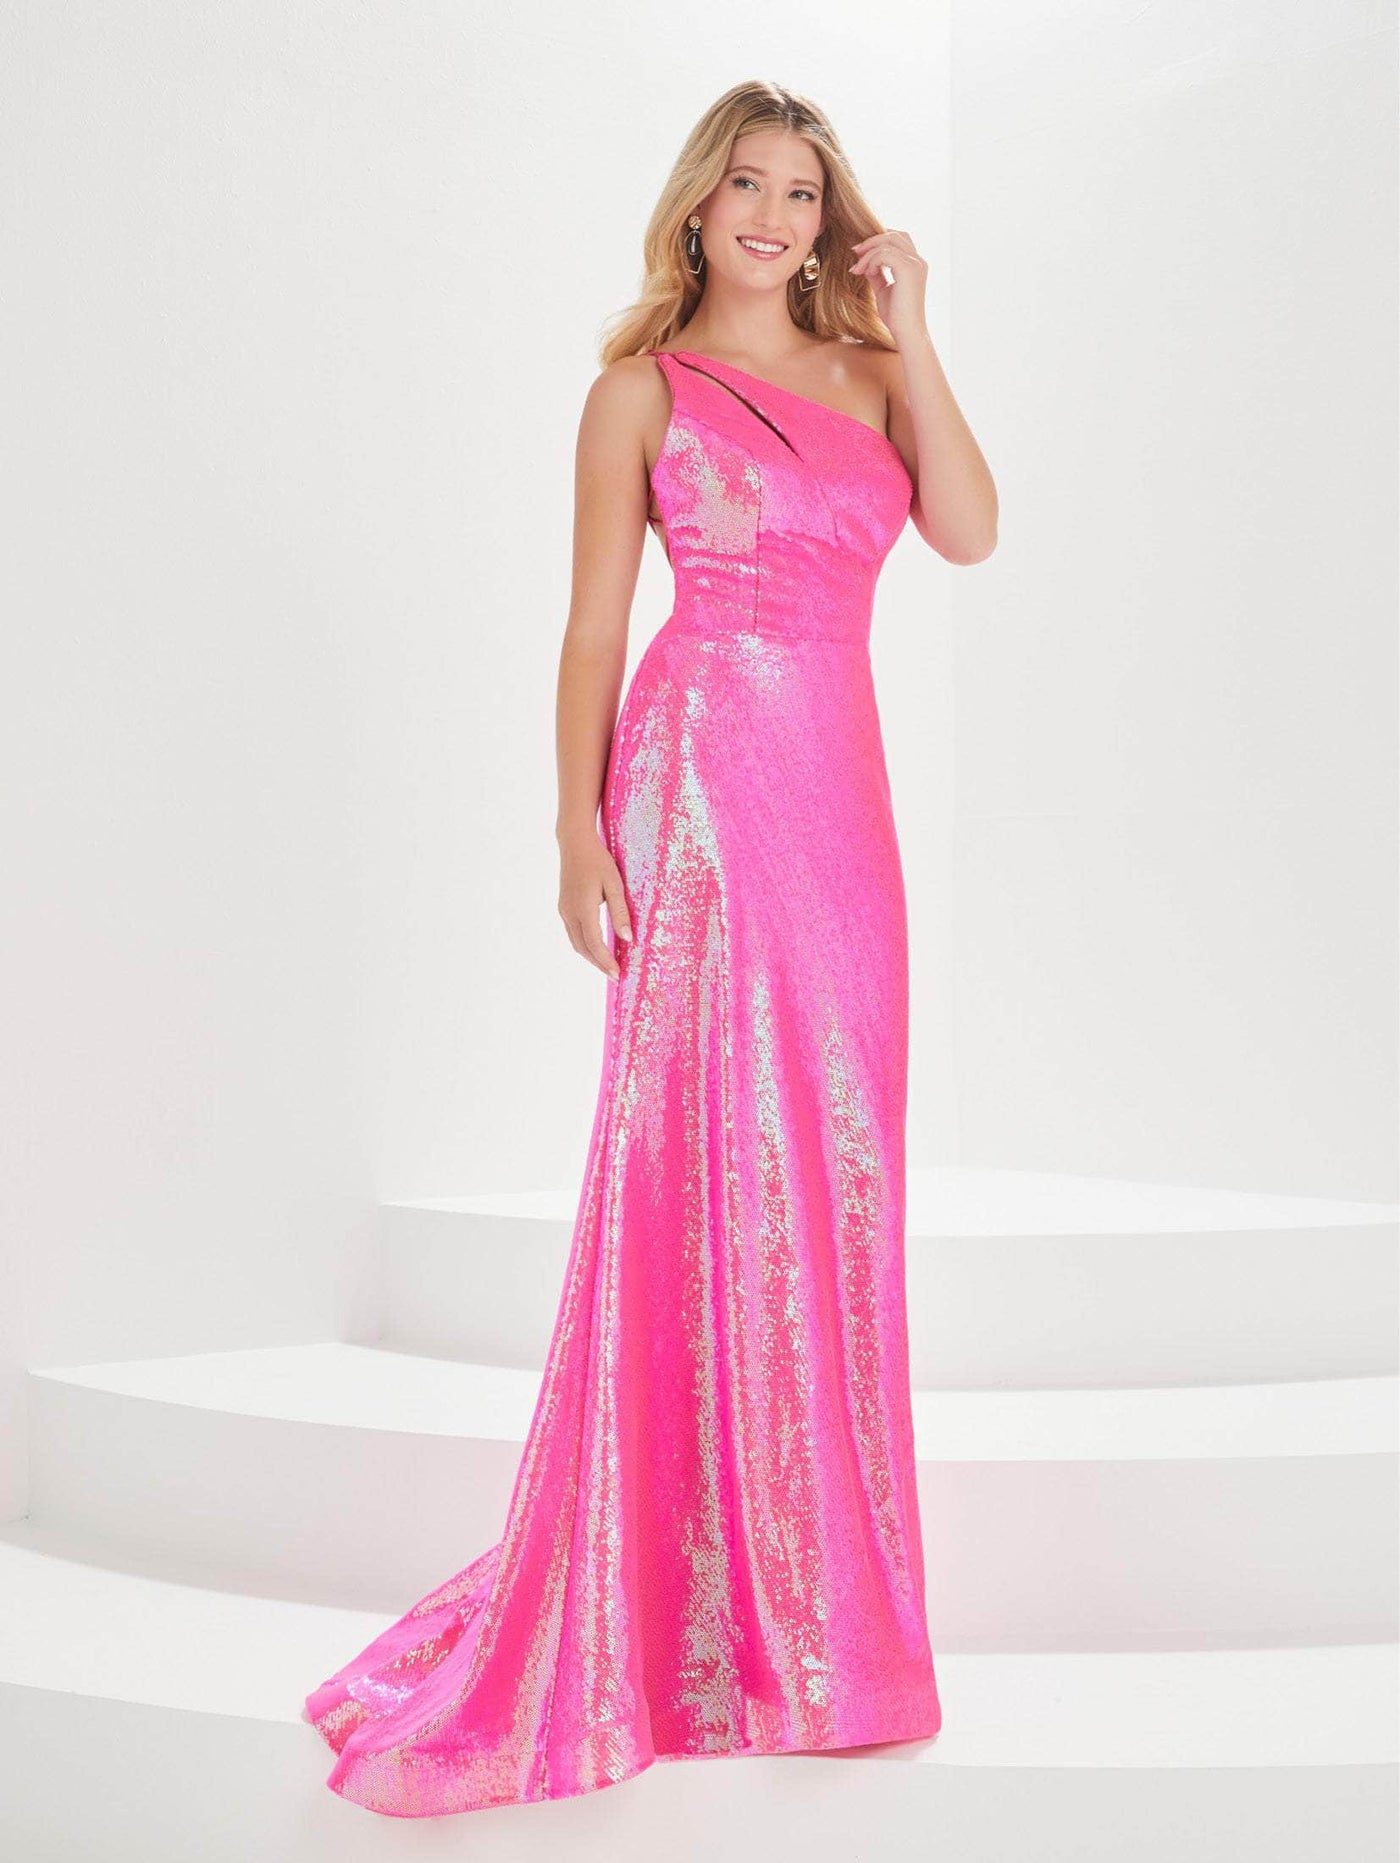 Tiffany Designs by Christina Wu 16006 - Sequined Prom Gown Special Occasion Dress